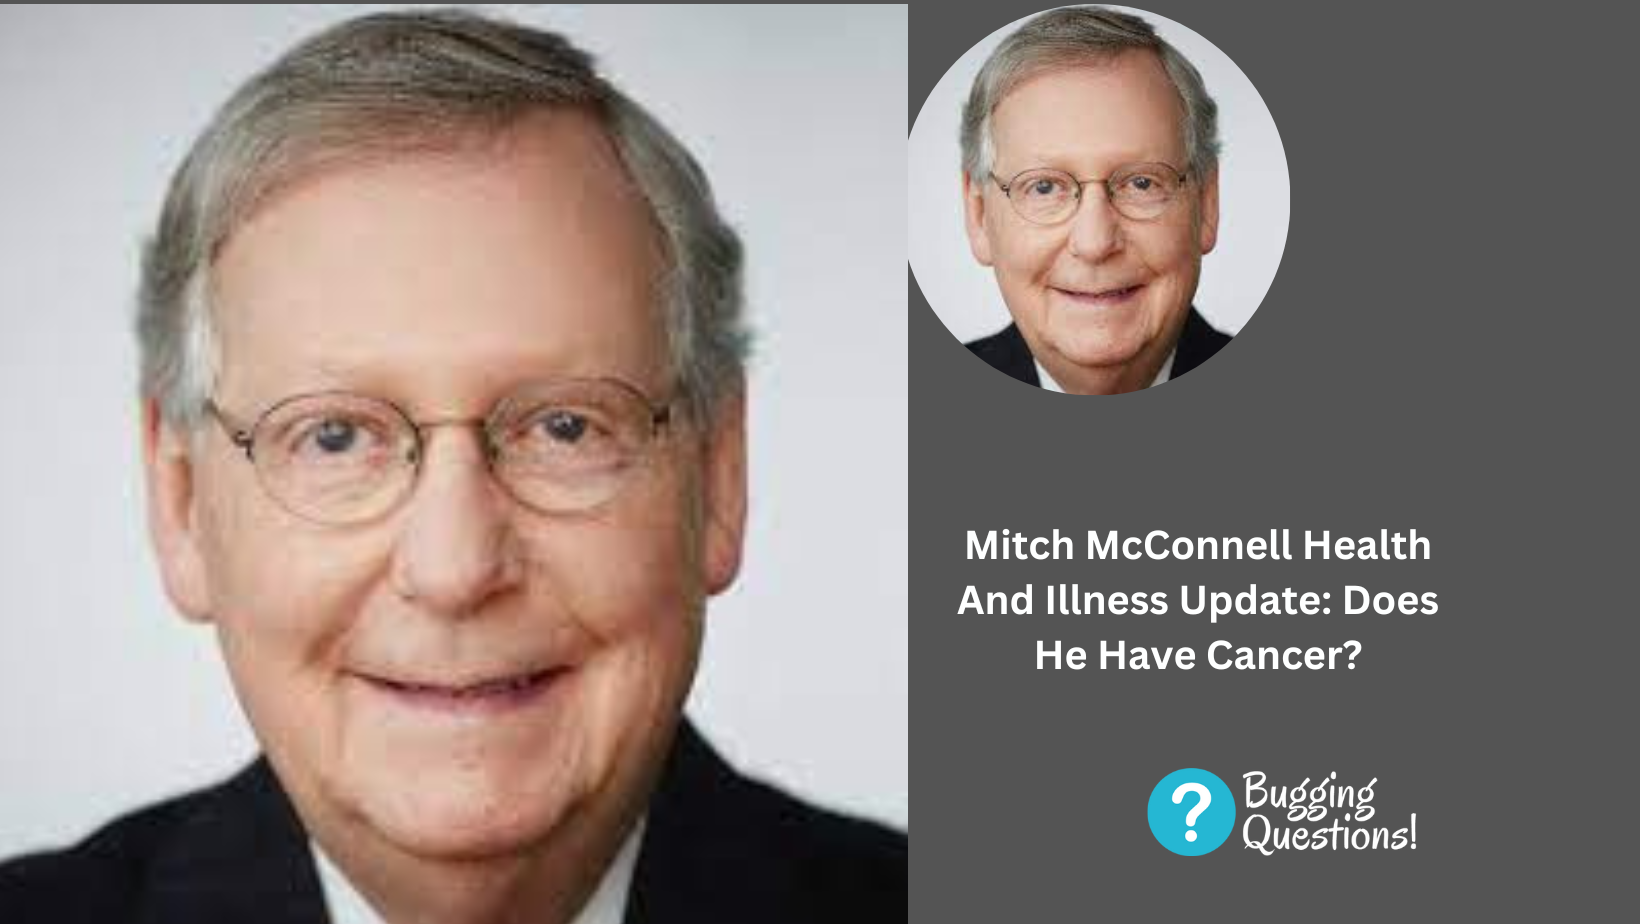 Mitch McConnell Health And Illness Update: Does He Have Cancer?